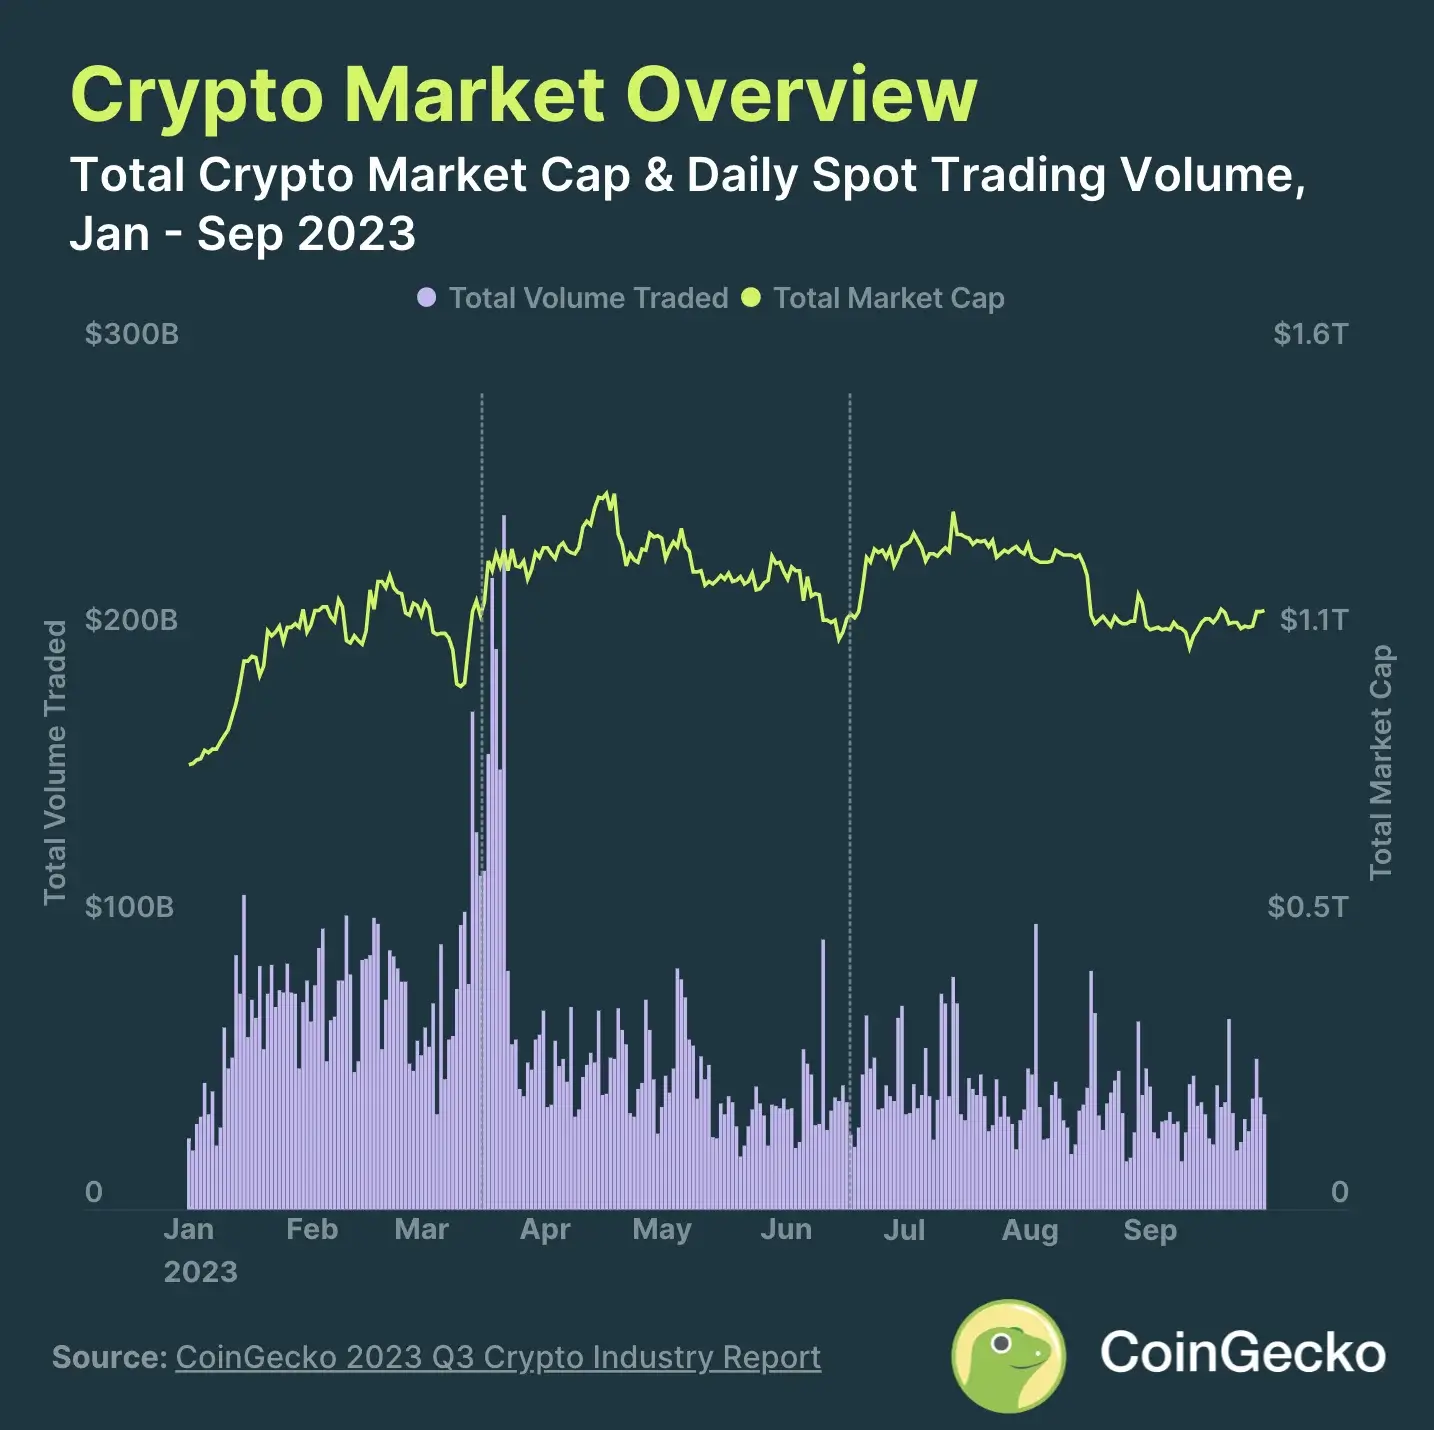 1. The total crypto market cap dropped 10% in 2023